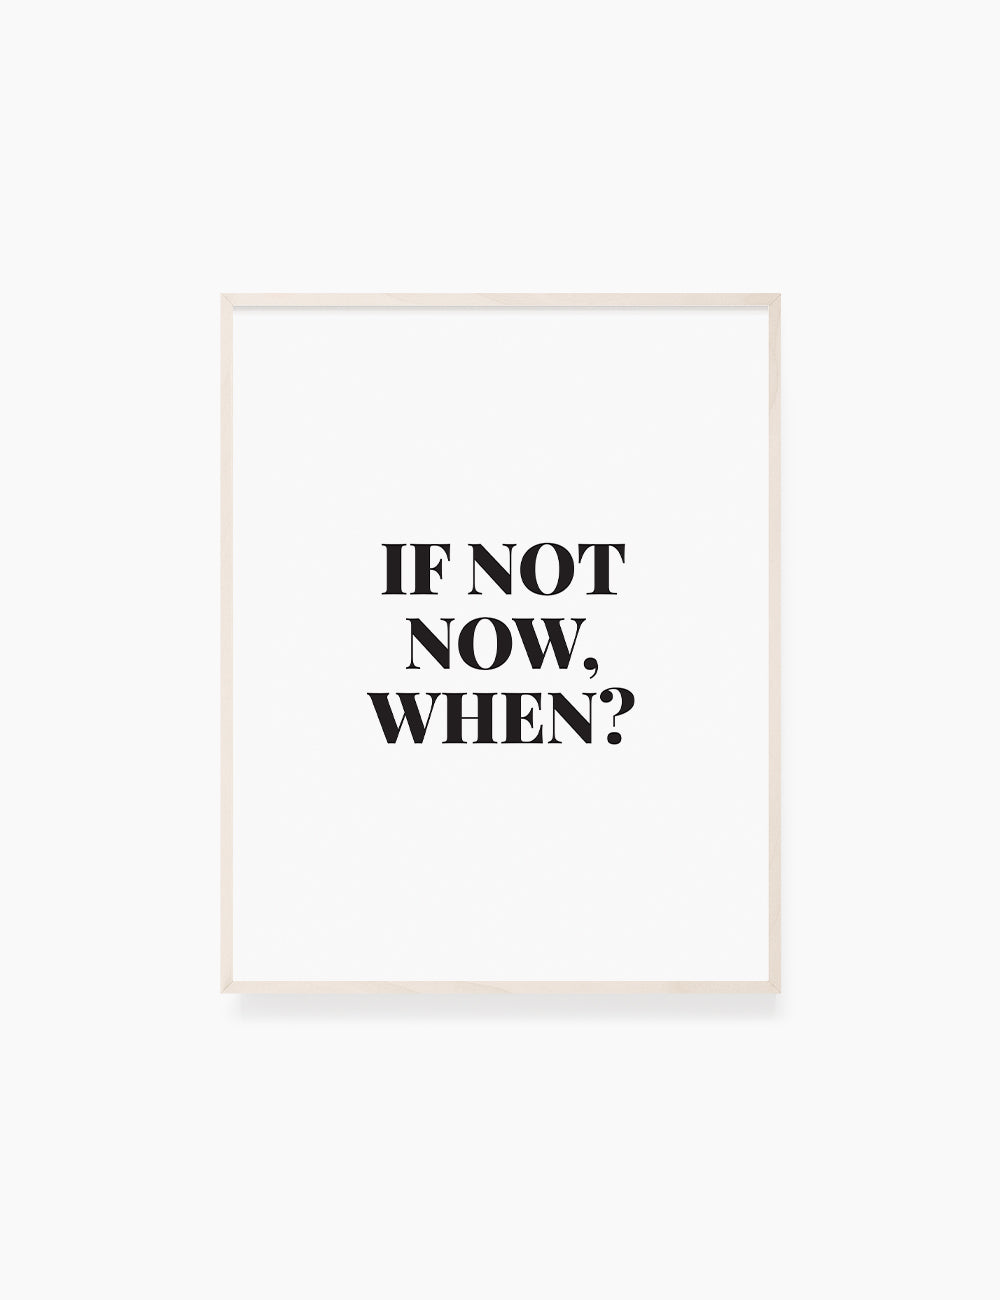 Printable Wall Art Quote: IF NOT NOW, WHEN? Printable Poster. Inspirational Quote. Motivational Quote. WA002 - Paper Moon Art & Design